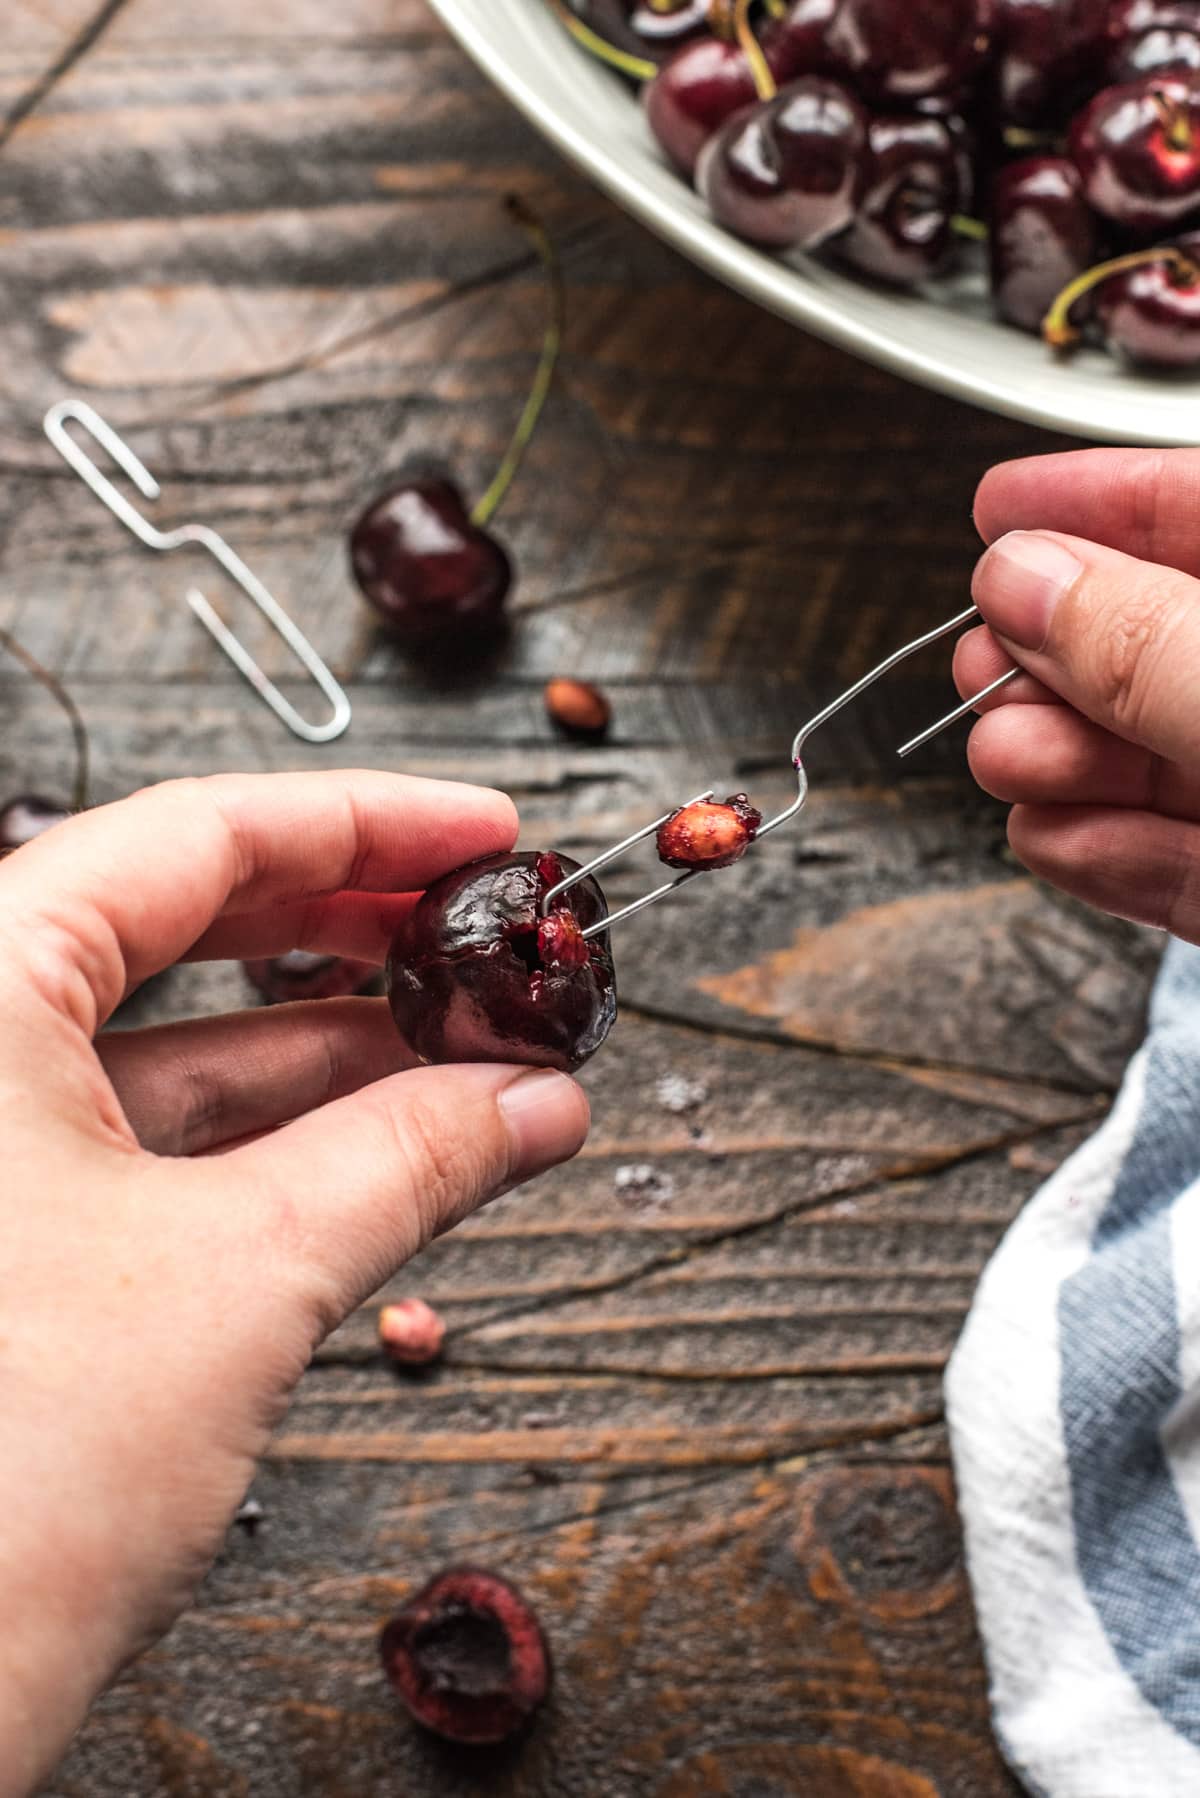 An S-shaped paperclip inserted into a cherry and displaying a removed pit.